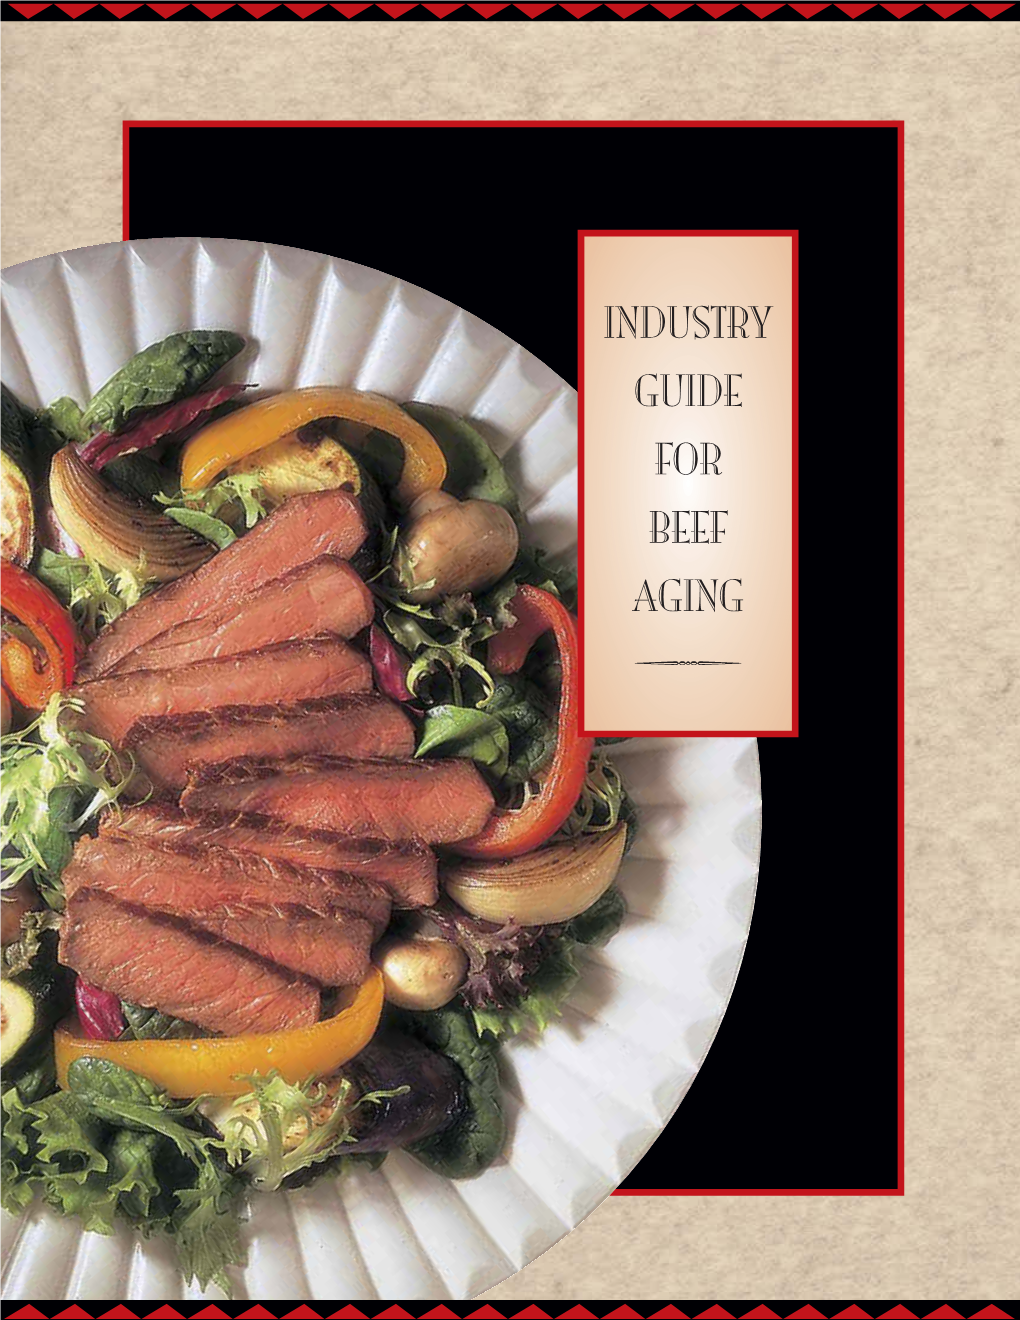 Industry Guide for Beef Aging